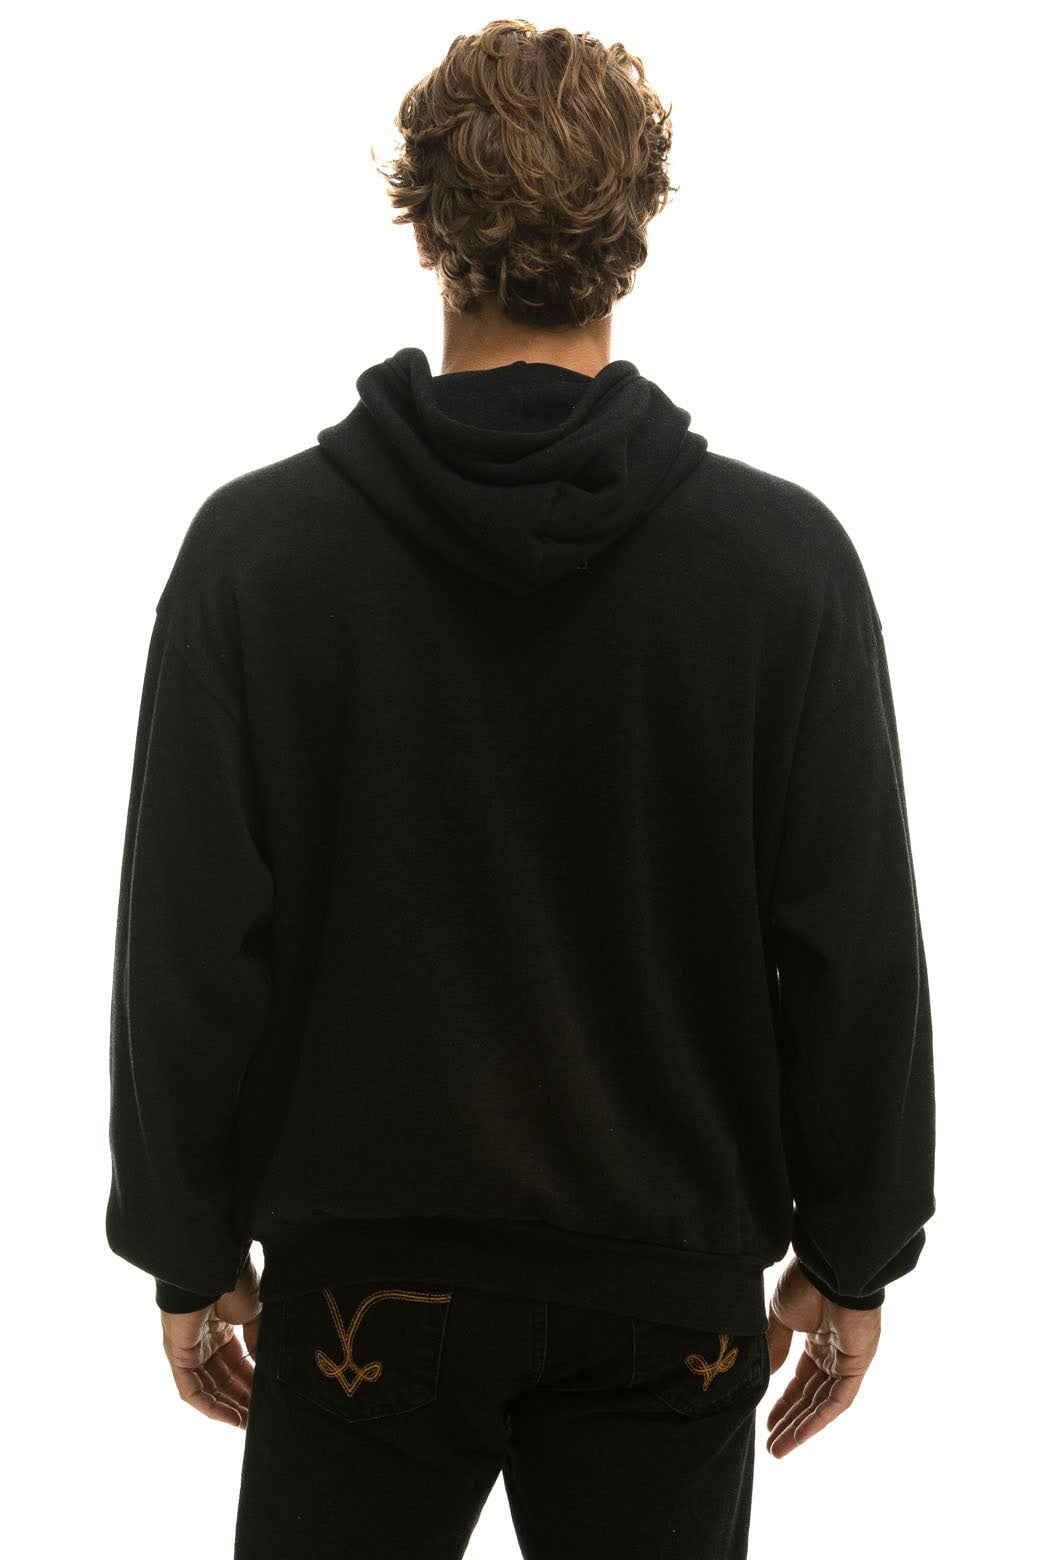 HEART EMBROIDERY RELAXED PULLOVER HOODIE - BLACK Hoodie Aviator Nation 